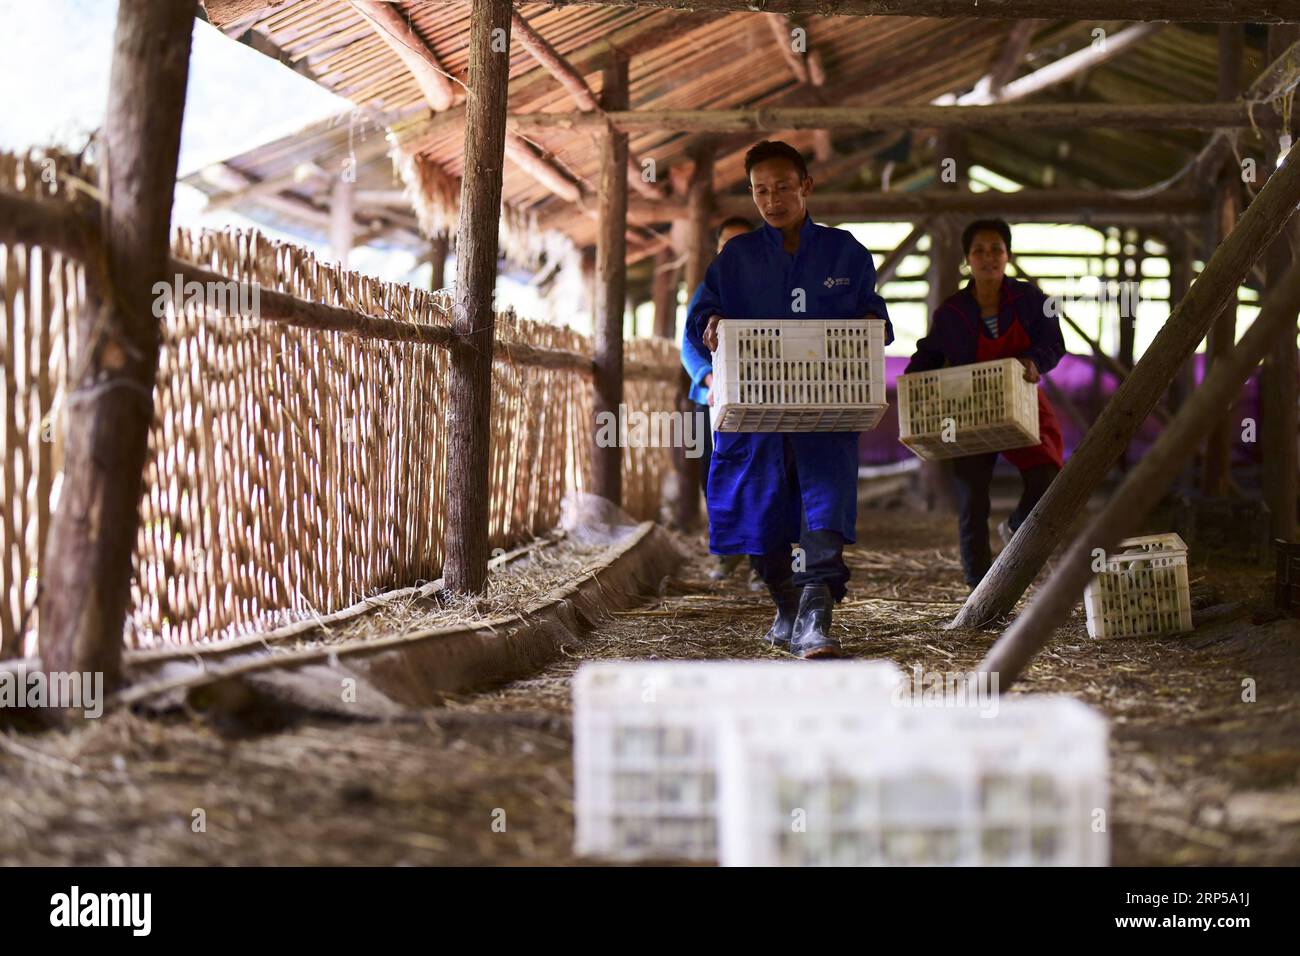 (181205) -- DANZHAI, Dec. 5, 2018 (Xinhua) -- Yang Zaiheng (front) carries duck eggs at an egg-laying duck farm in Dingdong Village of Danzhai County, Qiandongnan Miao and Dong Autonomous Prefecture, southwest China s Guizhou Province, Dec. 4, 2018. Duck farmer Yang Zaiheng, 42, was once impoverished. After getting rid of poverty in 2015 through livestock and fish farming, Yang decided to promote the breeding industry in local area and help other impoverished households increase income. In 2017, Yang and other six households set up an egg-laying duck breeding cooperative with a duck egg produc Stock Photo